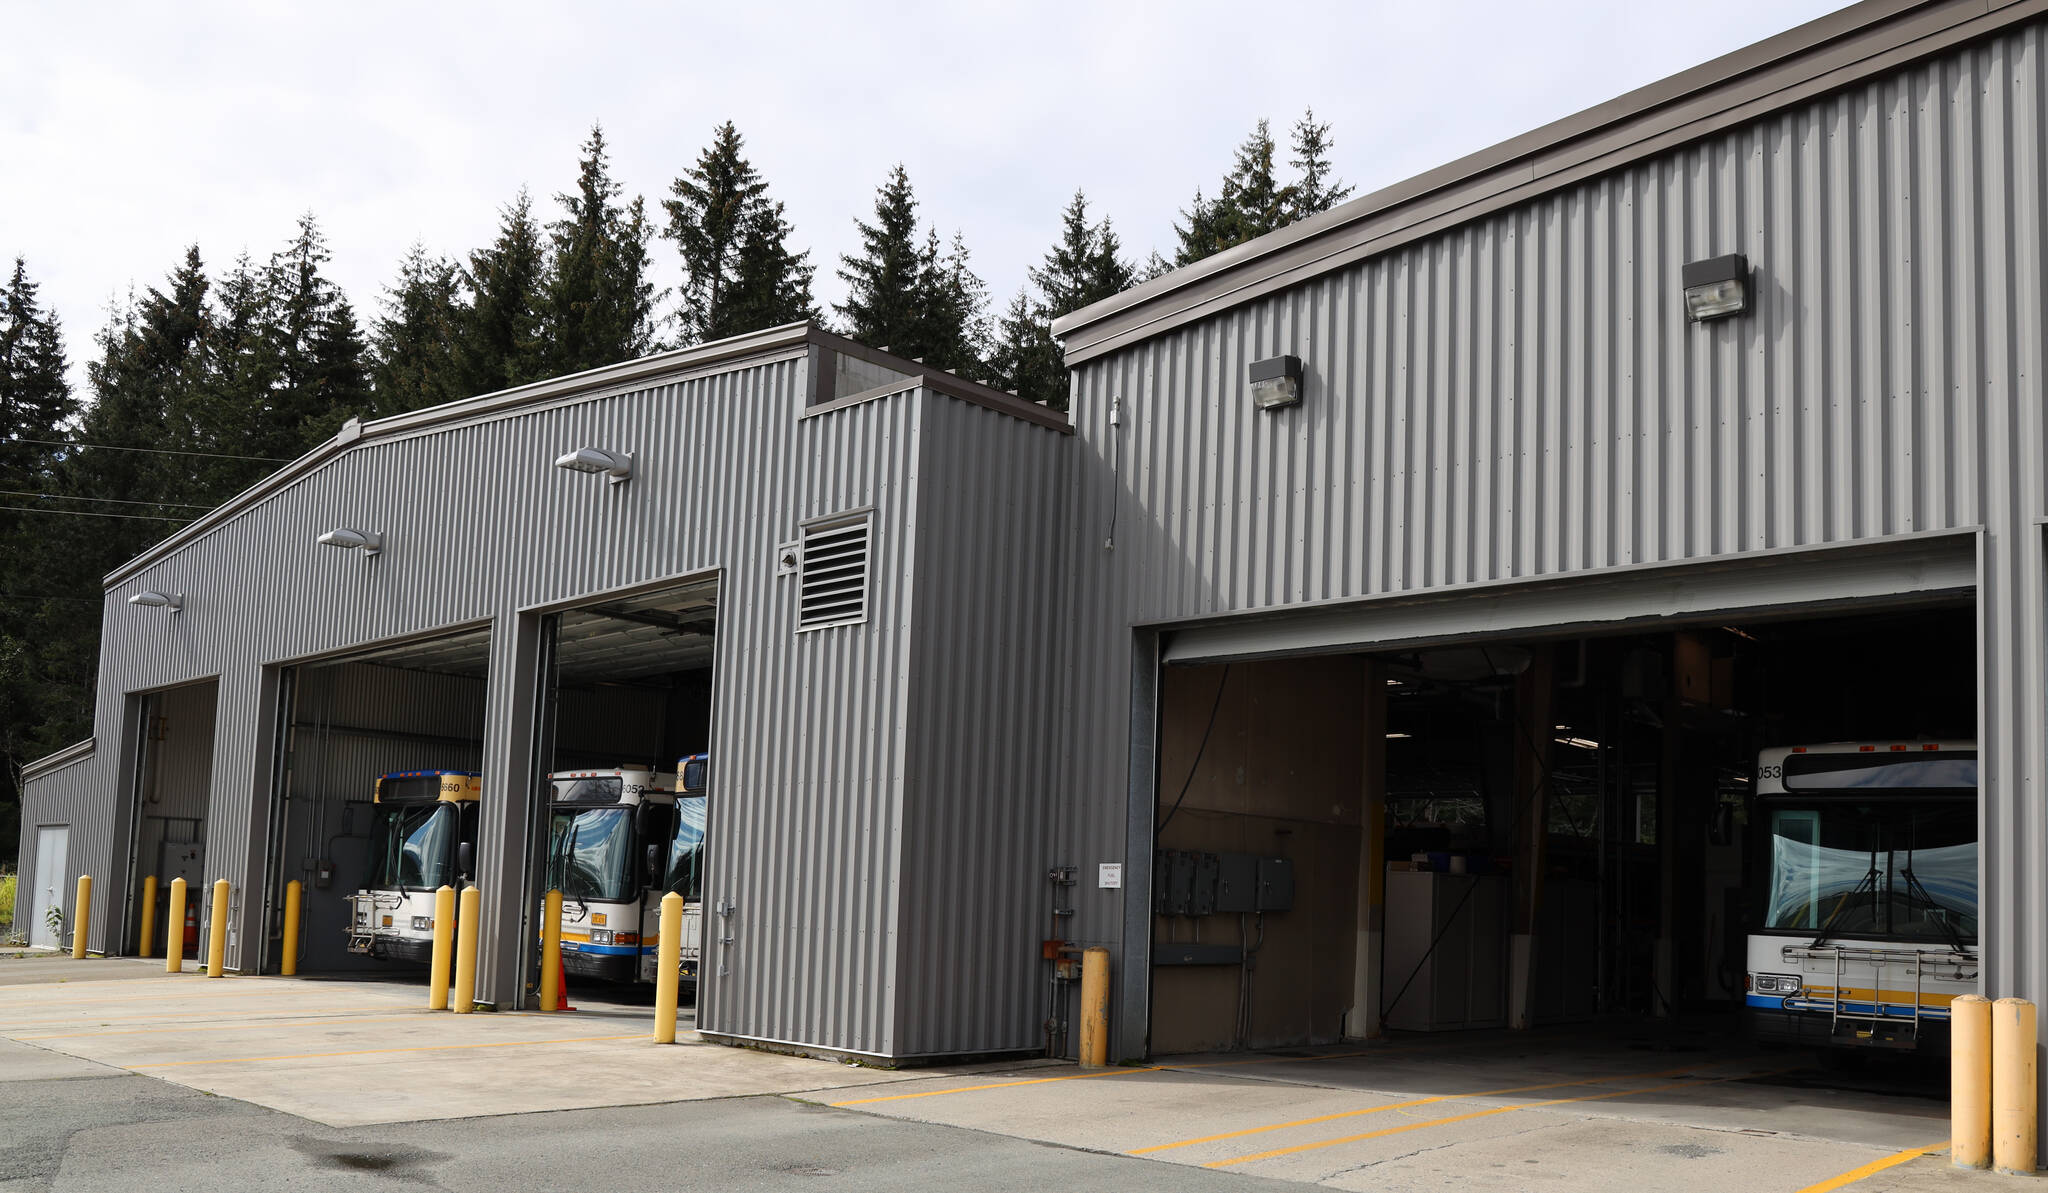 Buses line the open garage doors of the City Borough of Juneau Capital Transit’s bus barn on Tuesday afternoon. Seven new electric buses will replace old diesel burning buses being used by the city. (Clarise Larson / Juneau Empire)